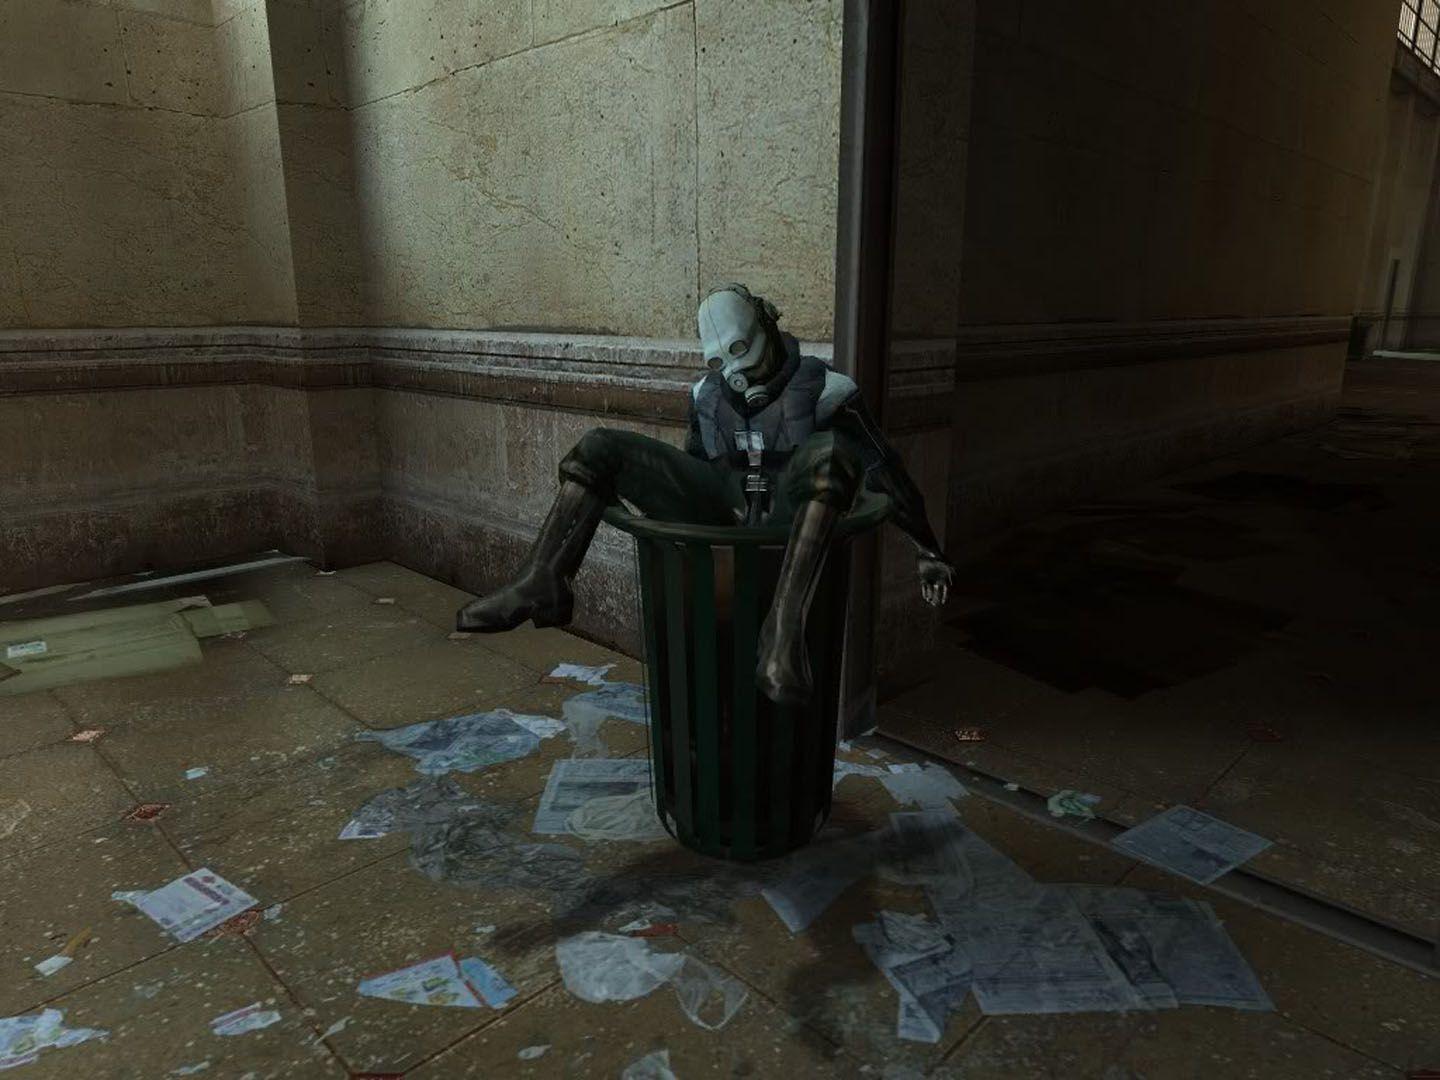 Combine Soldier Dumped In The Trash Life 2 Wallpaper